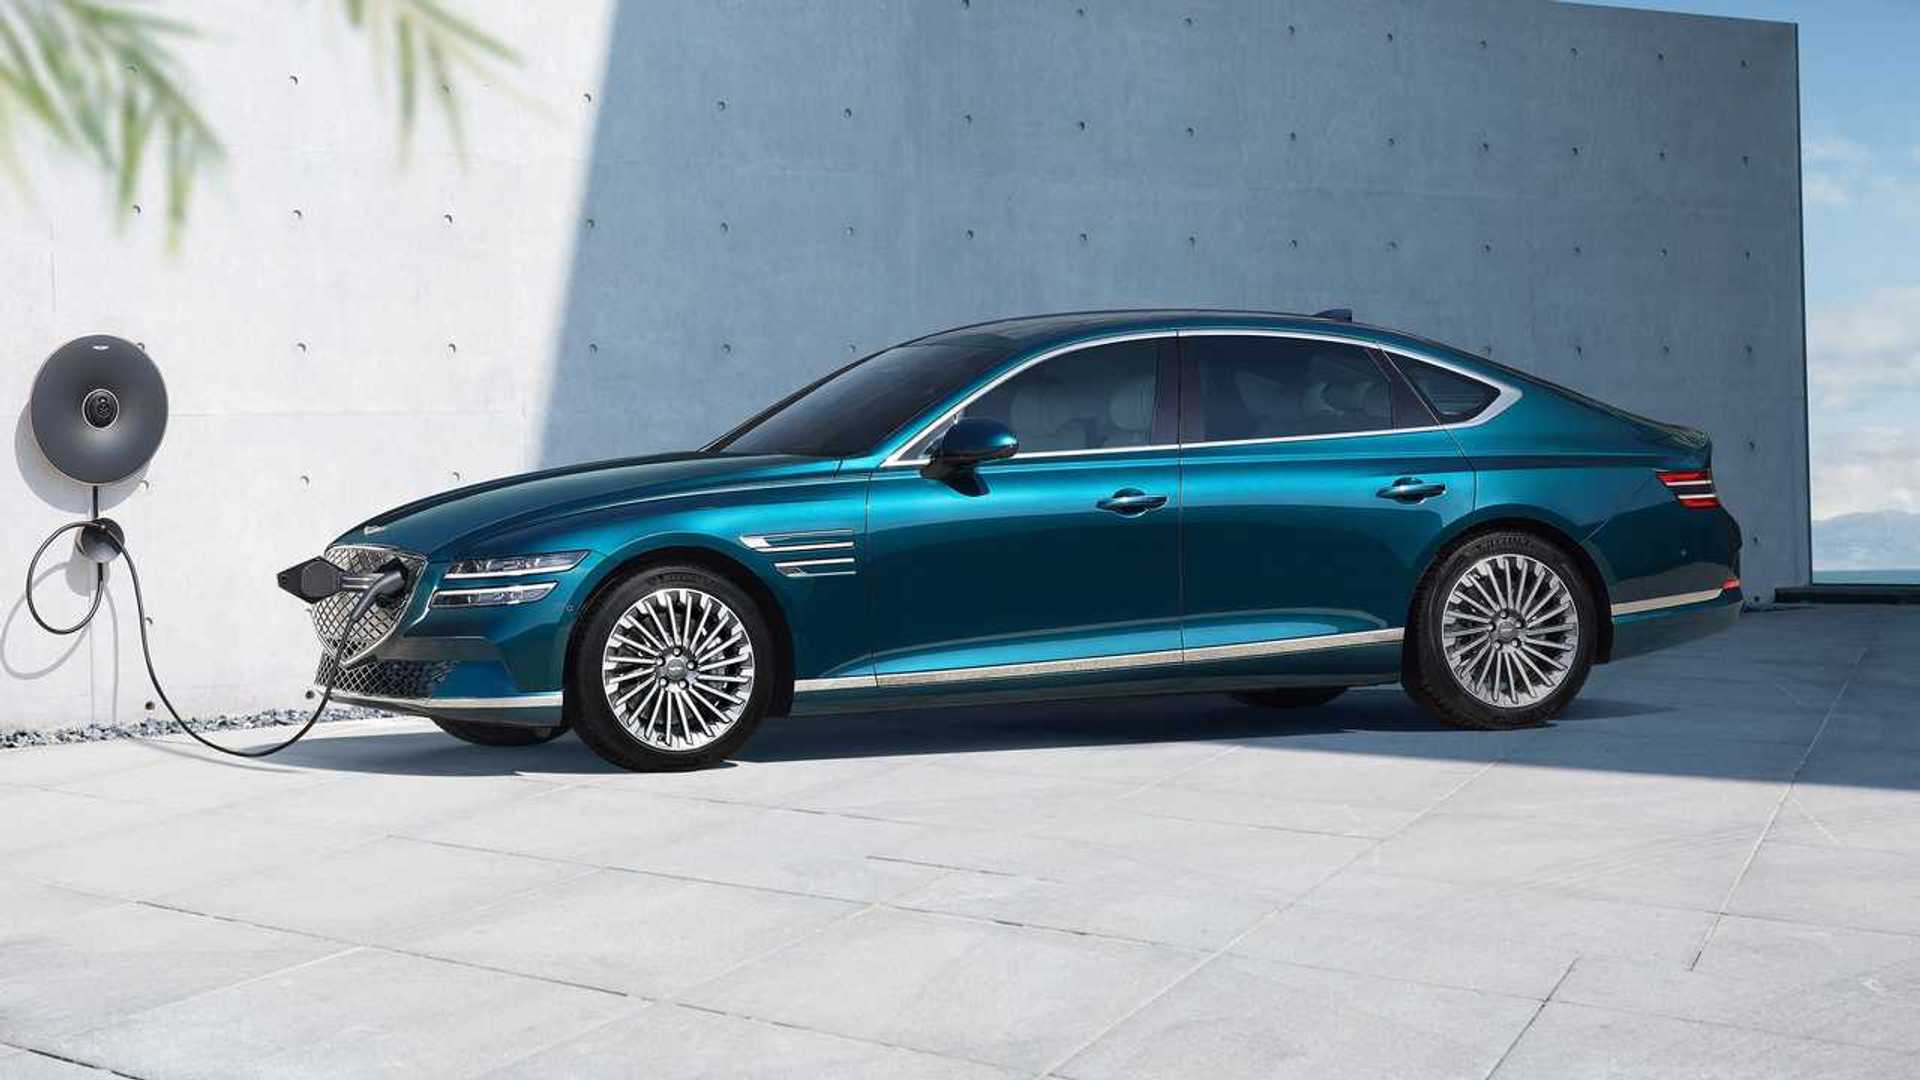 Report: Genesis Electrified G80 Launch Delayed